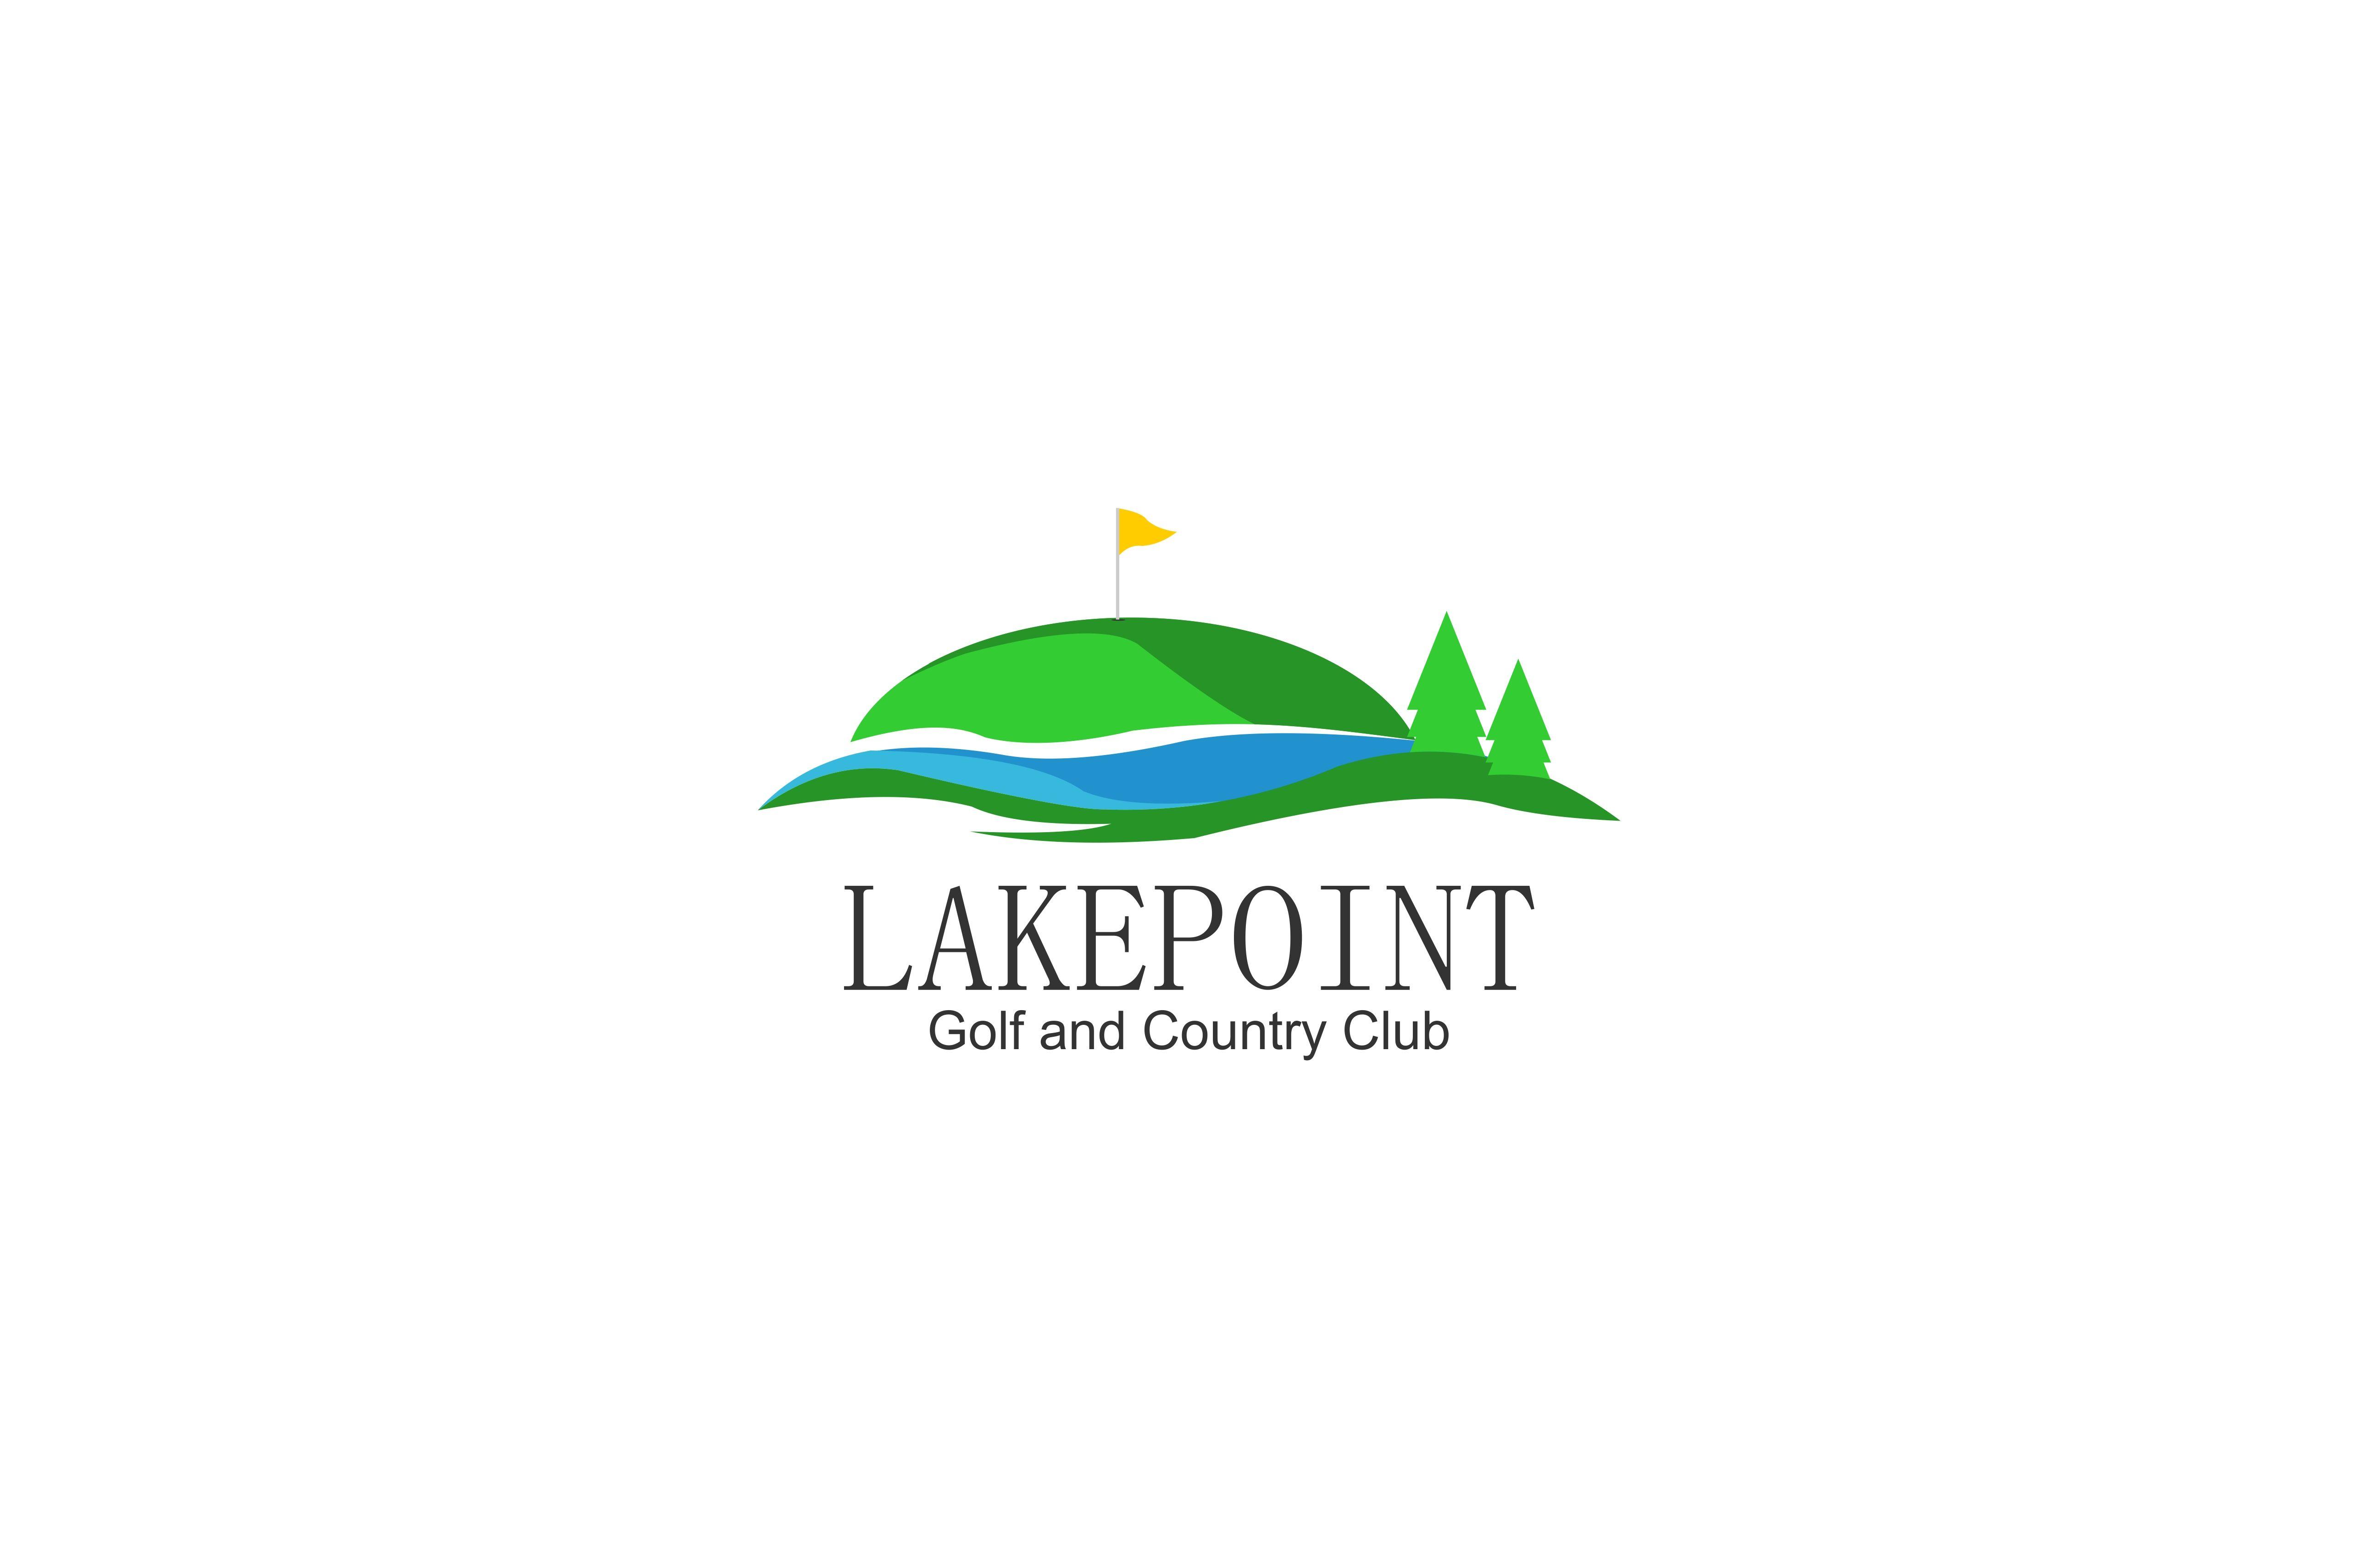 Lakepoint Logo - Logo Design #85 | 'Lakepoint Golf and Country Club' design project ...